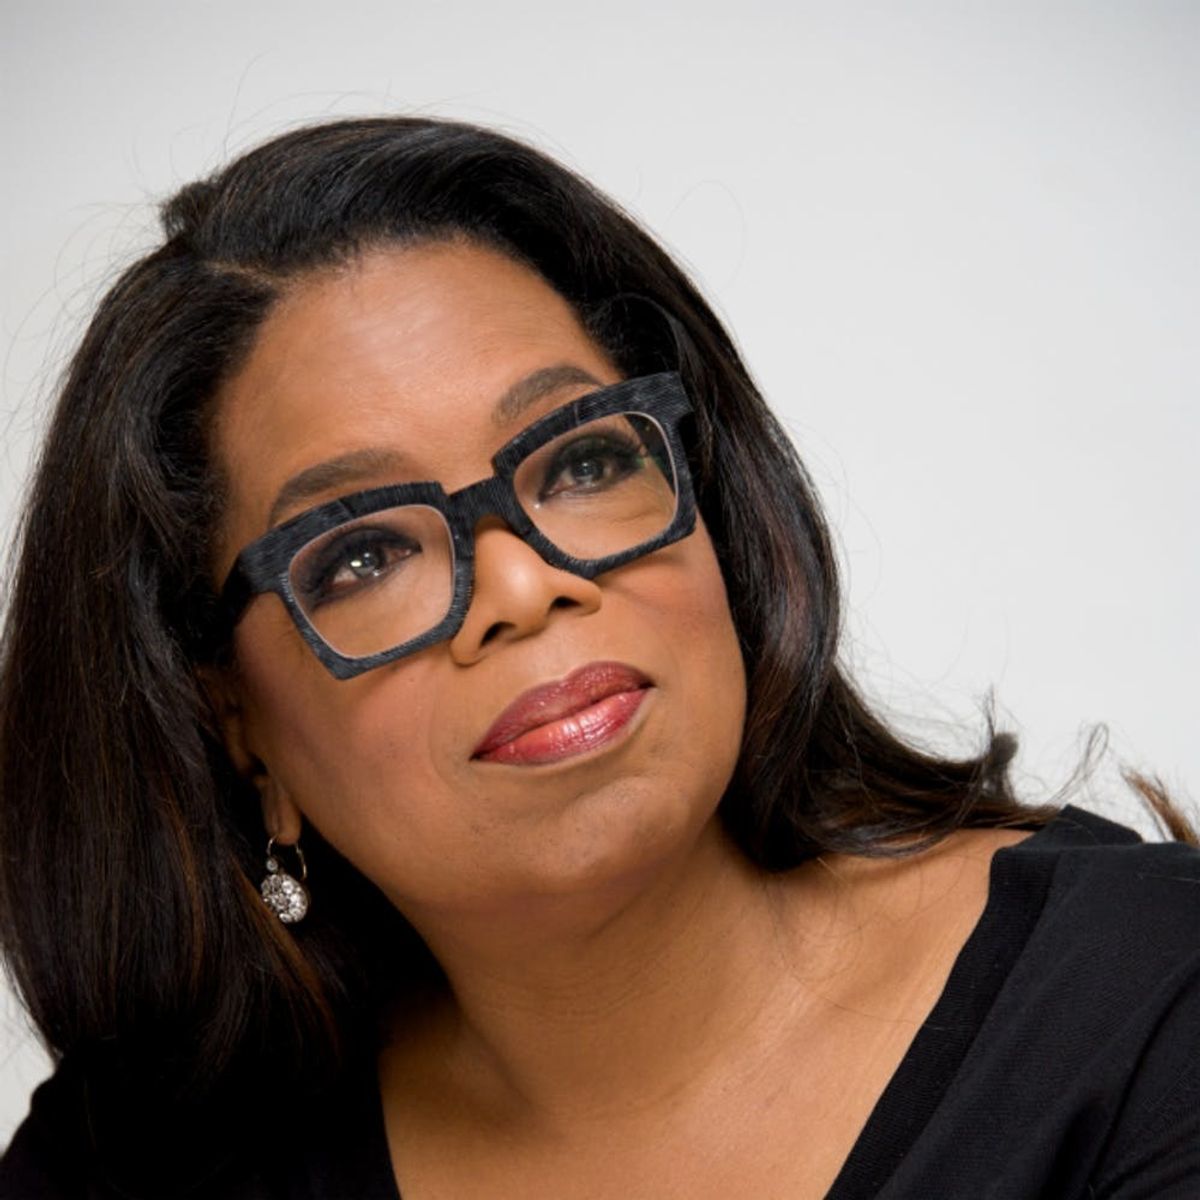 President Oprah Might Actually Be a Thing in the Future